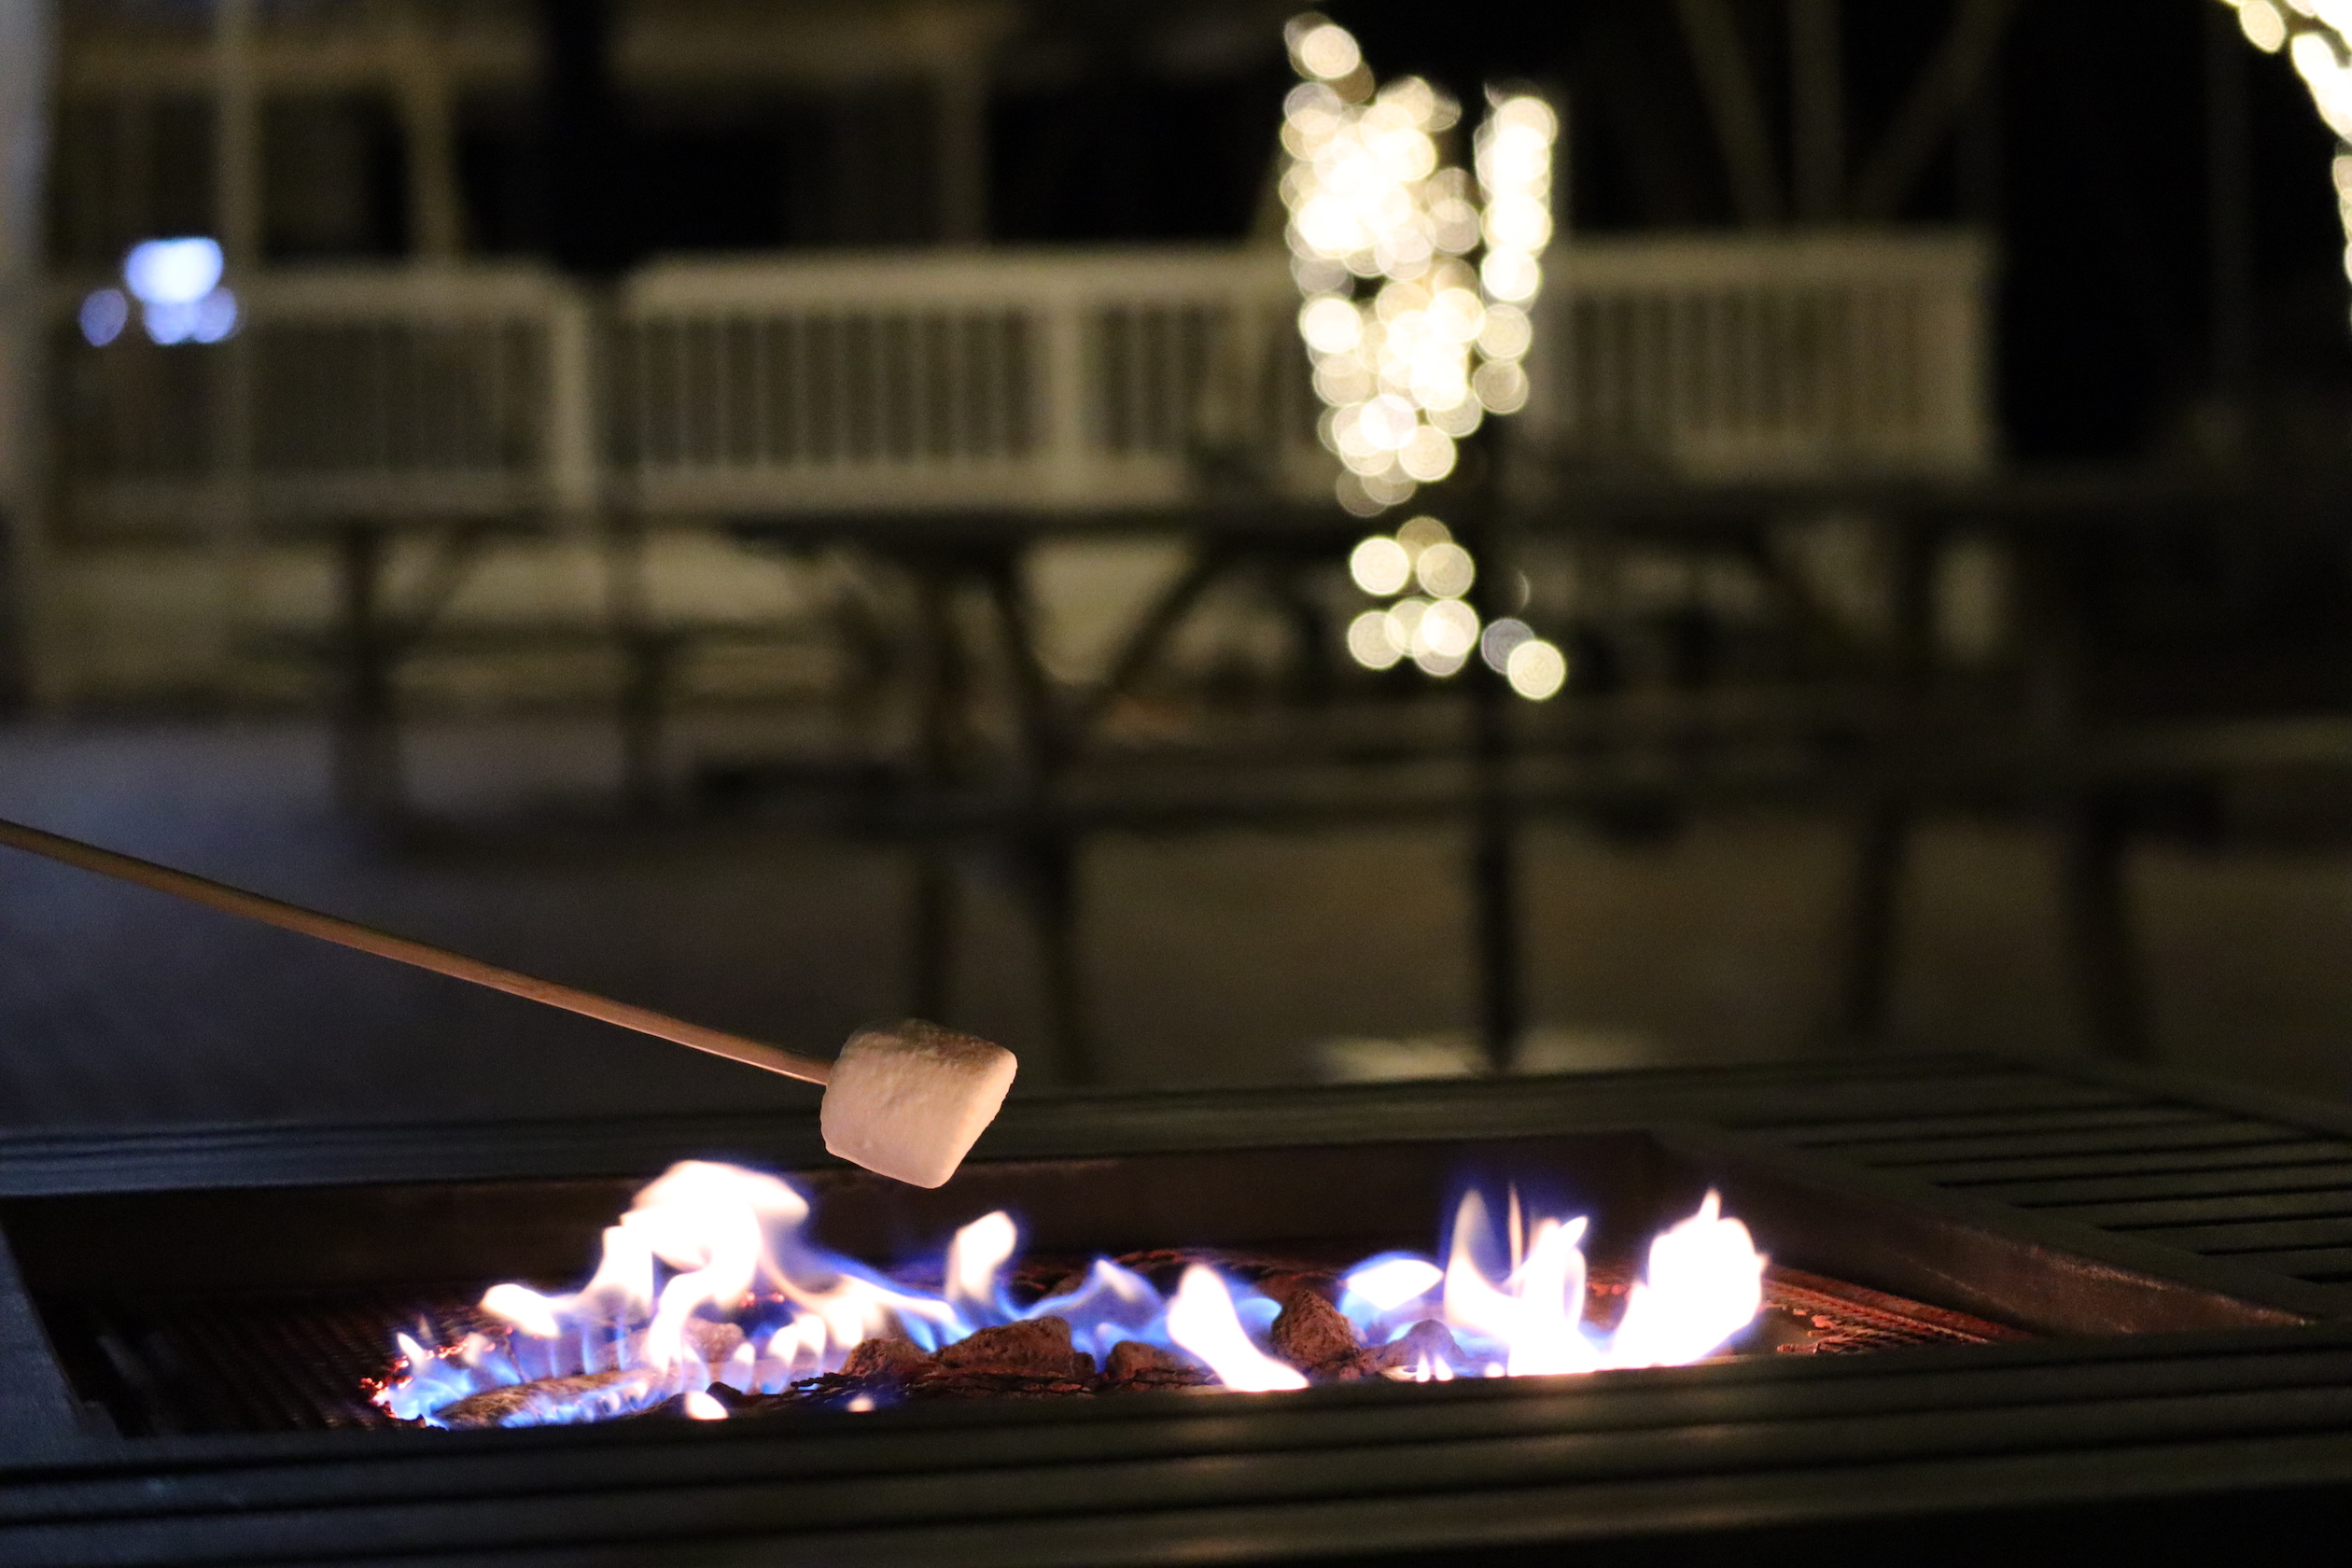 Roasting s'mores in front of the tasting room at Veritas WInery